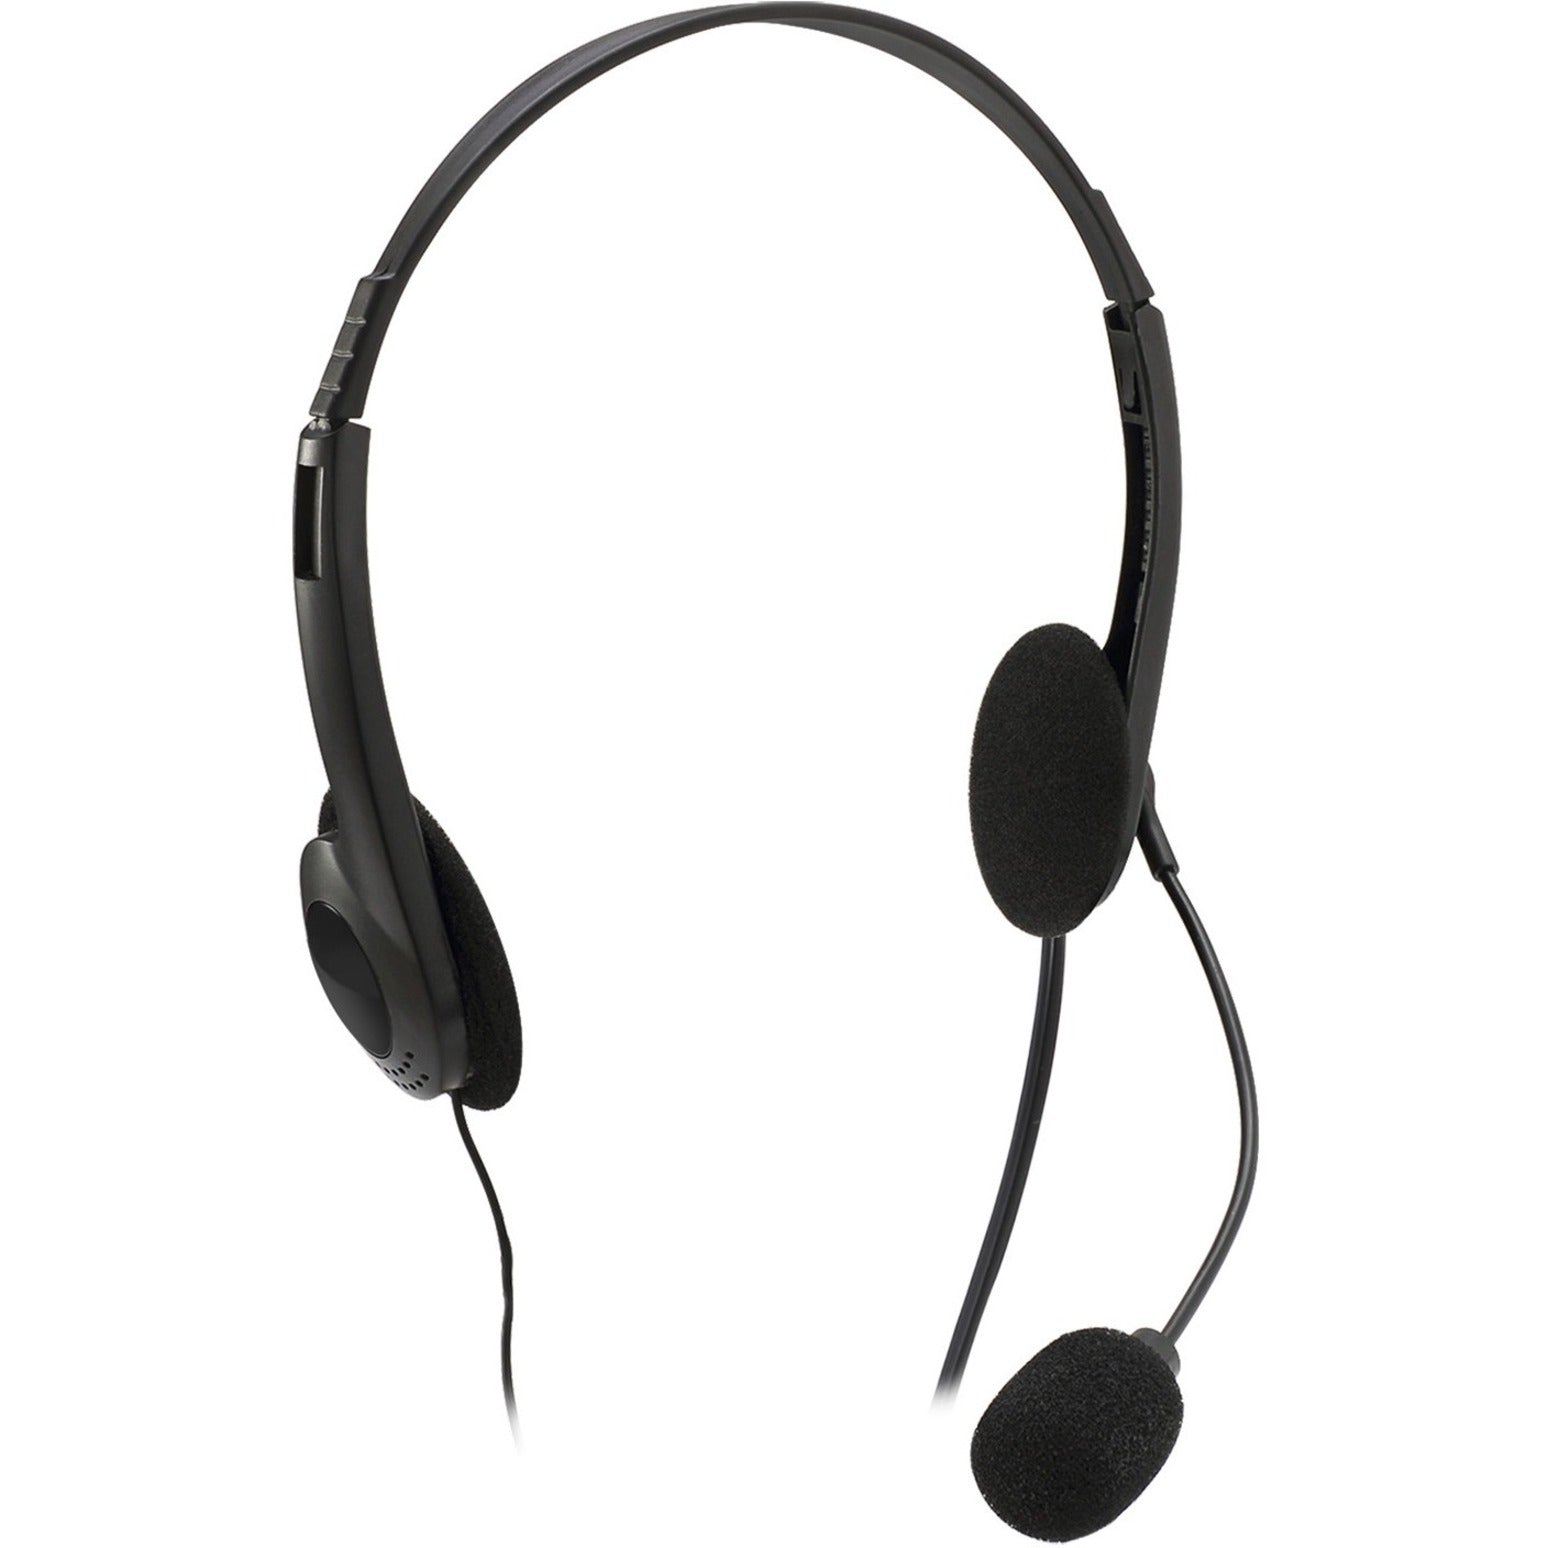 Adesso XTREAM H4 Stereo Headset with Microphone, Over-the-head, Inline Volume Control